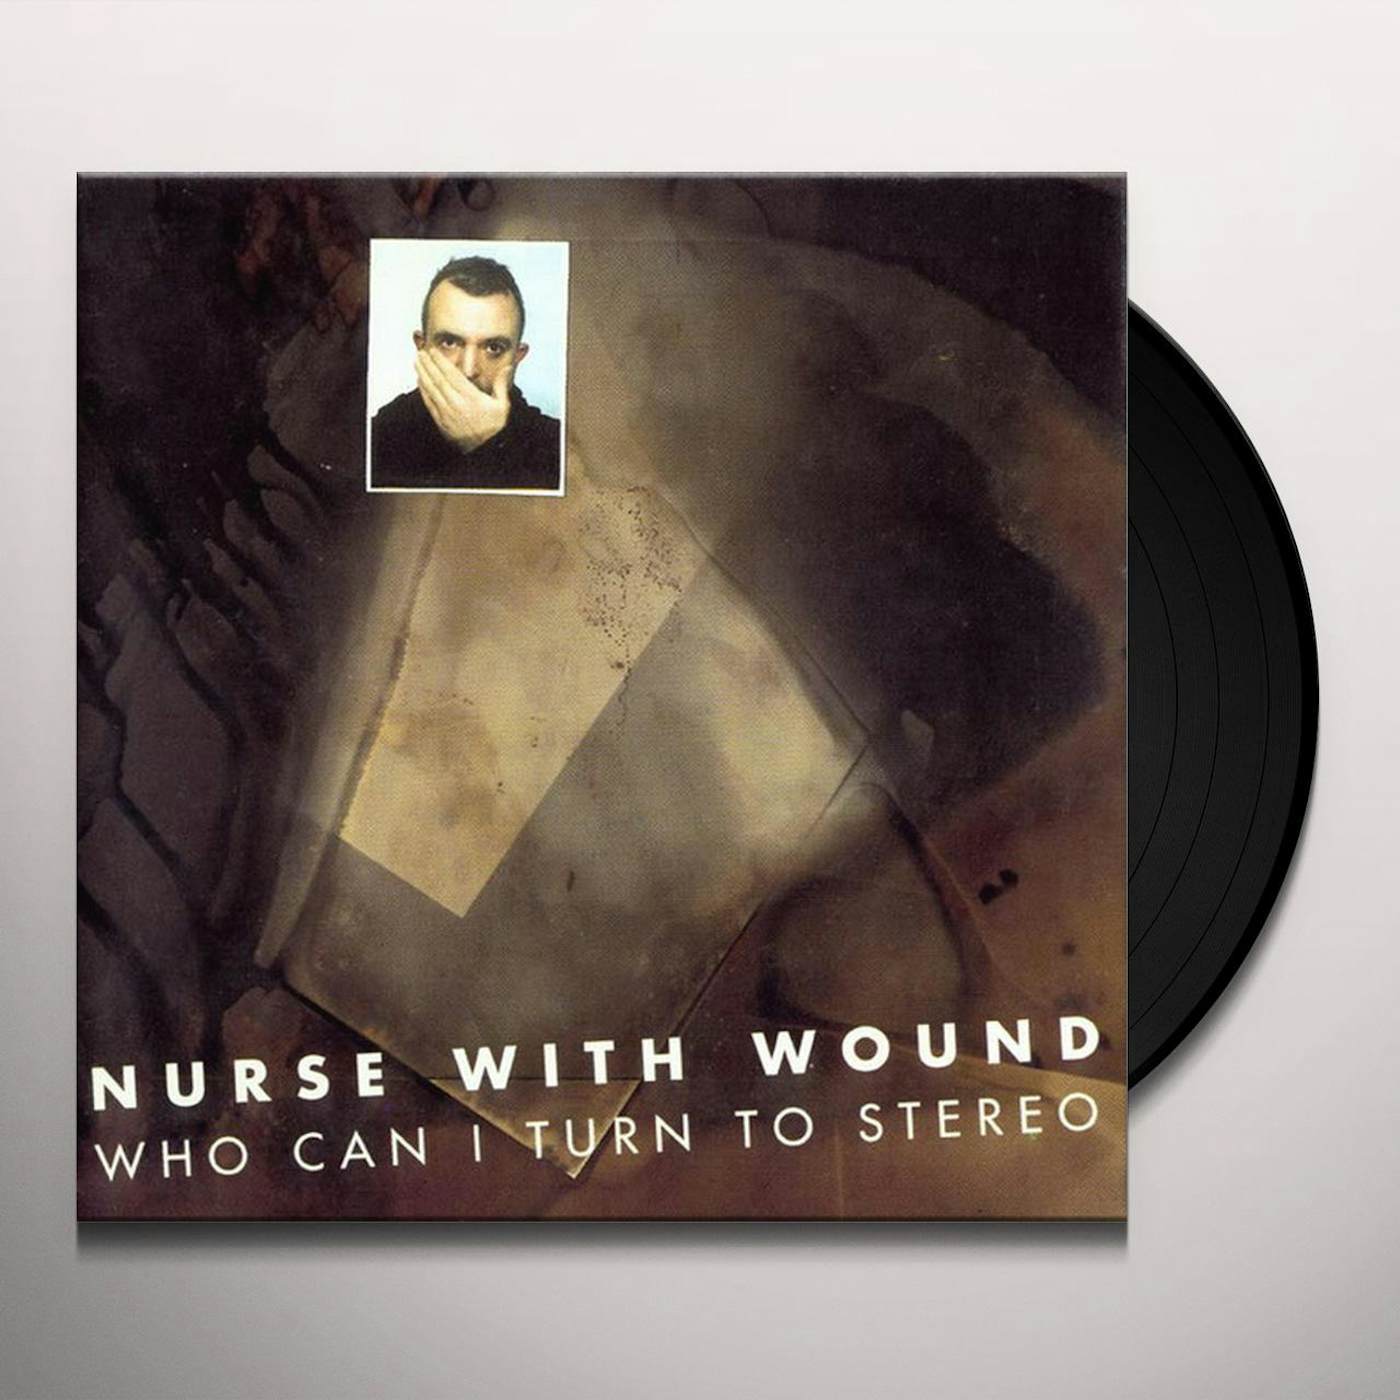 Nurse With Wound WHO CAN I TURN TO STEREO (LP/CD) Vinyl Record